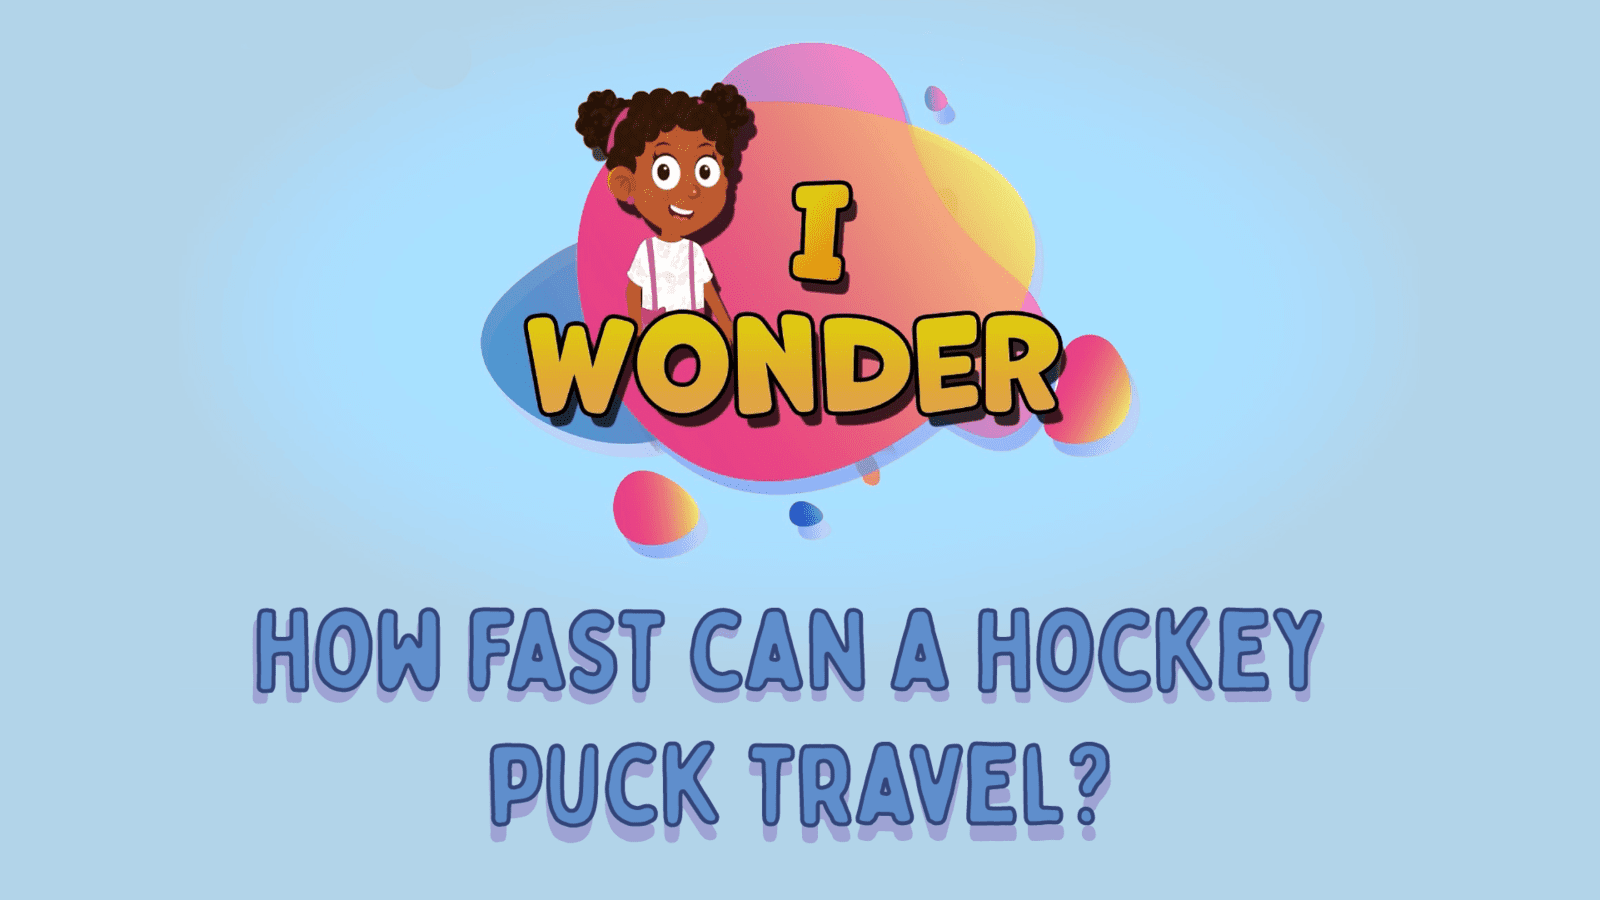 How Fast Can A Hockey Puck Travel?